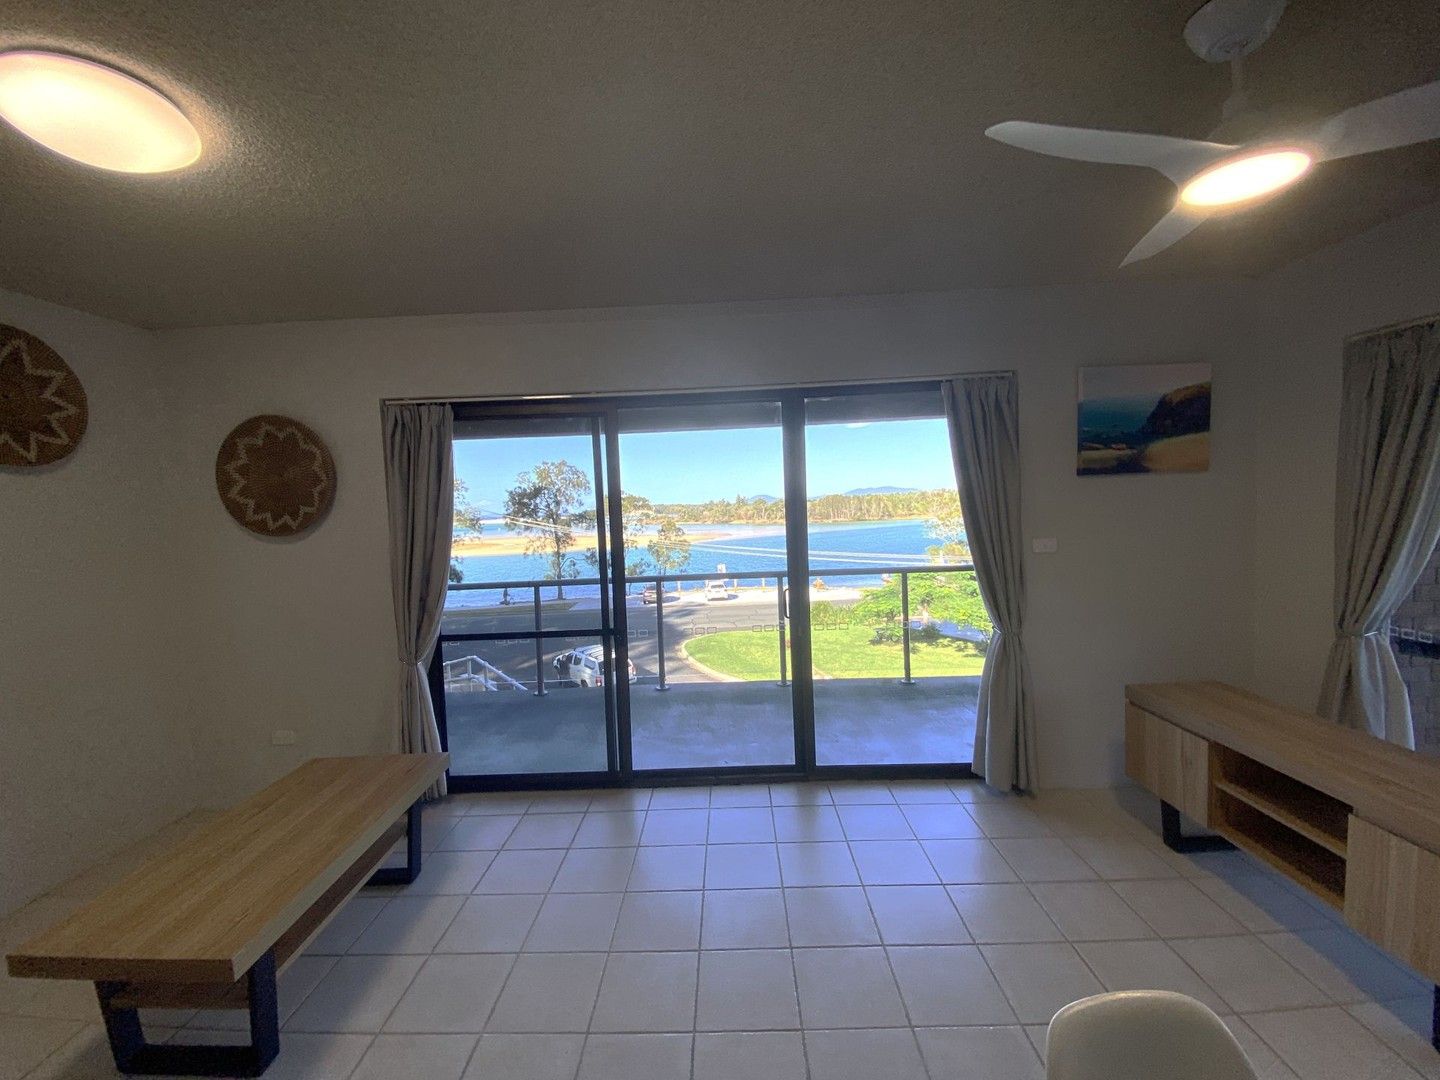 2 bedrooms Apartment / Unit / Flat in 4/8 Quarry Street NAMBUCCA HEADS NSW, 2448